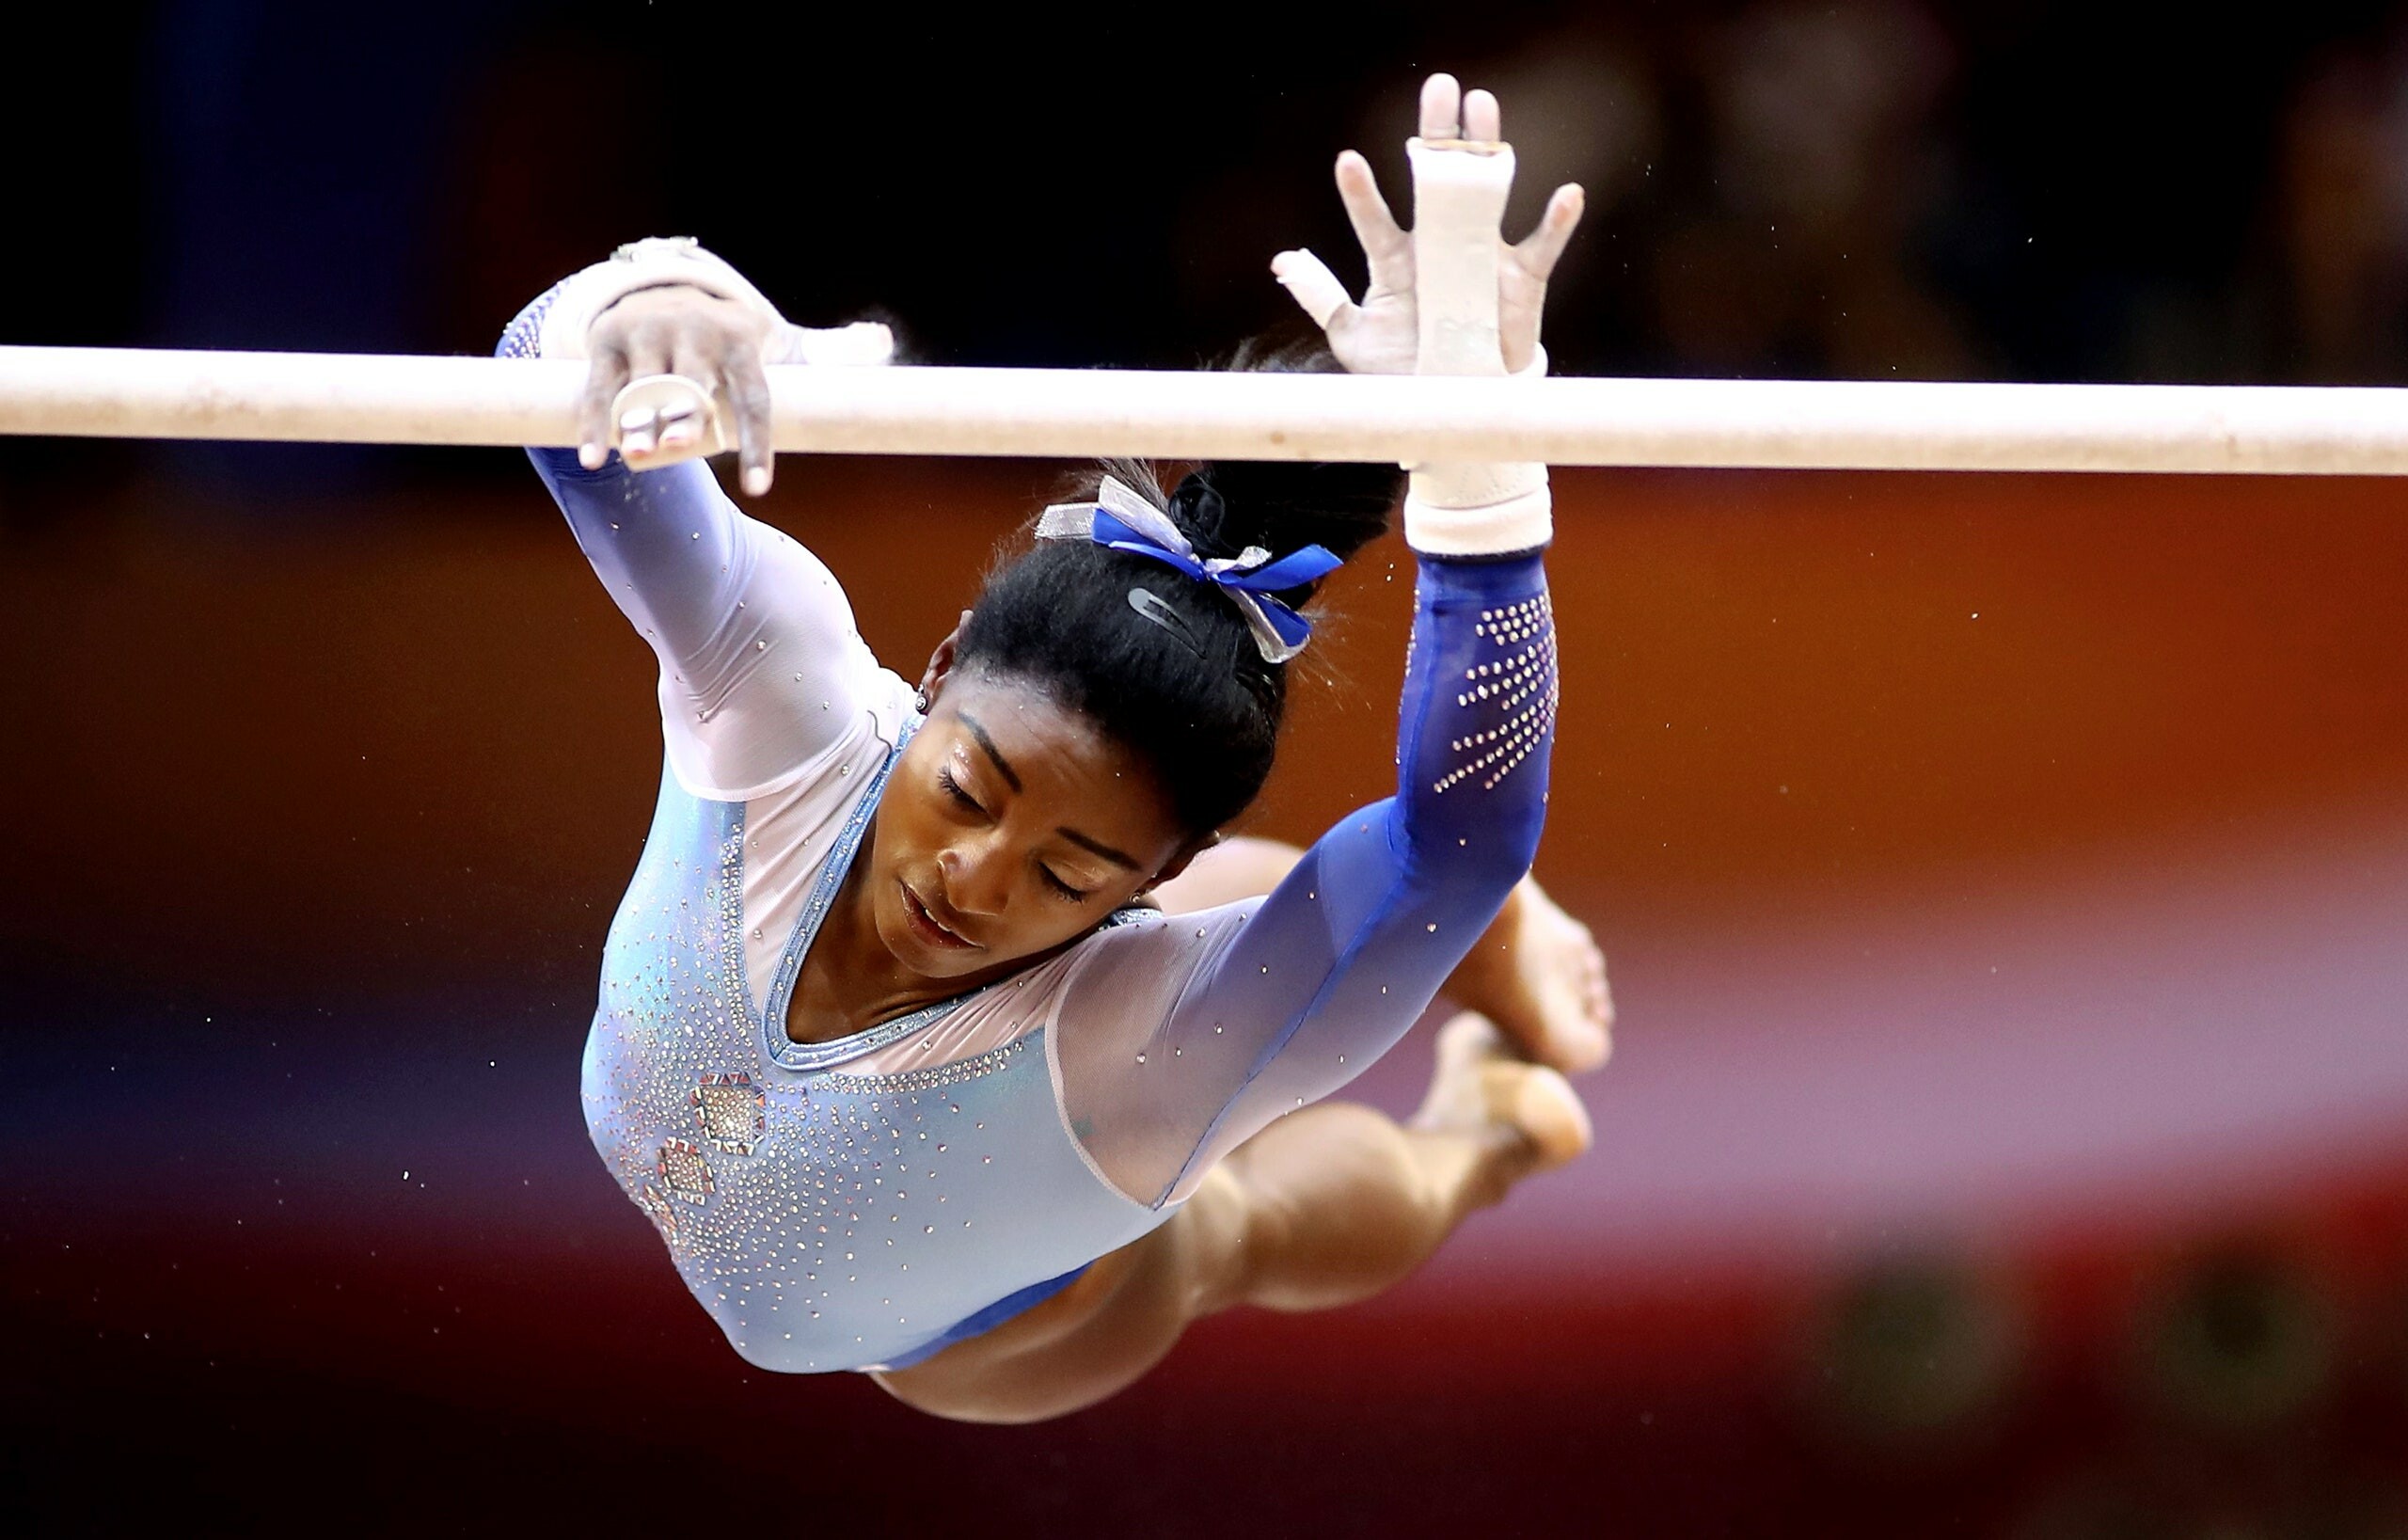 Simone Biles: The sixth woman to win an individual all-around title at both the World Championships and the Olympics. 2560x1640 HD Background.